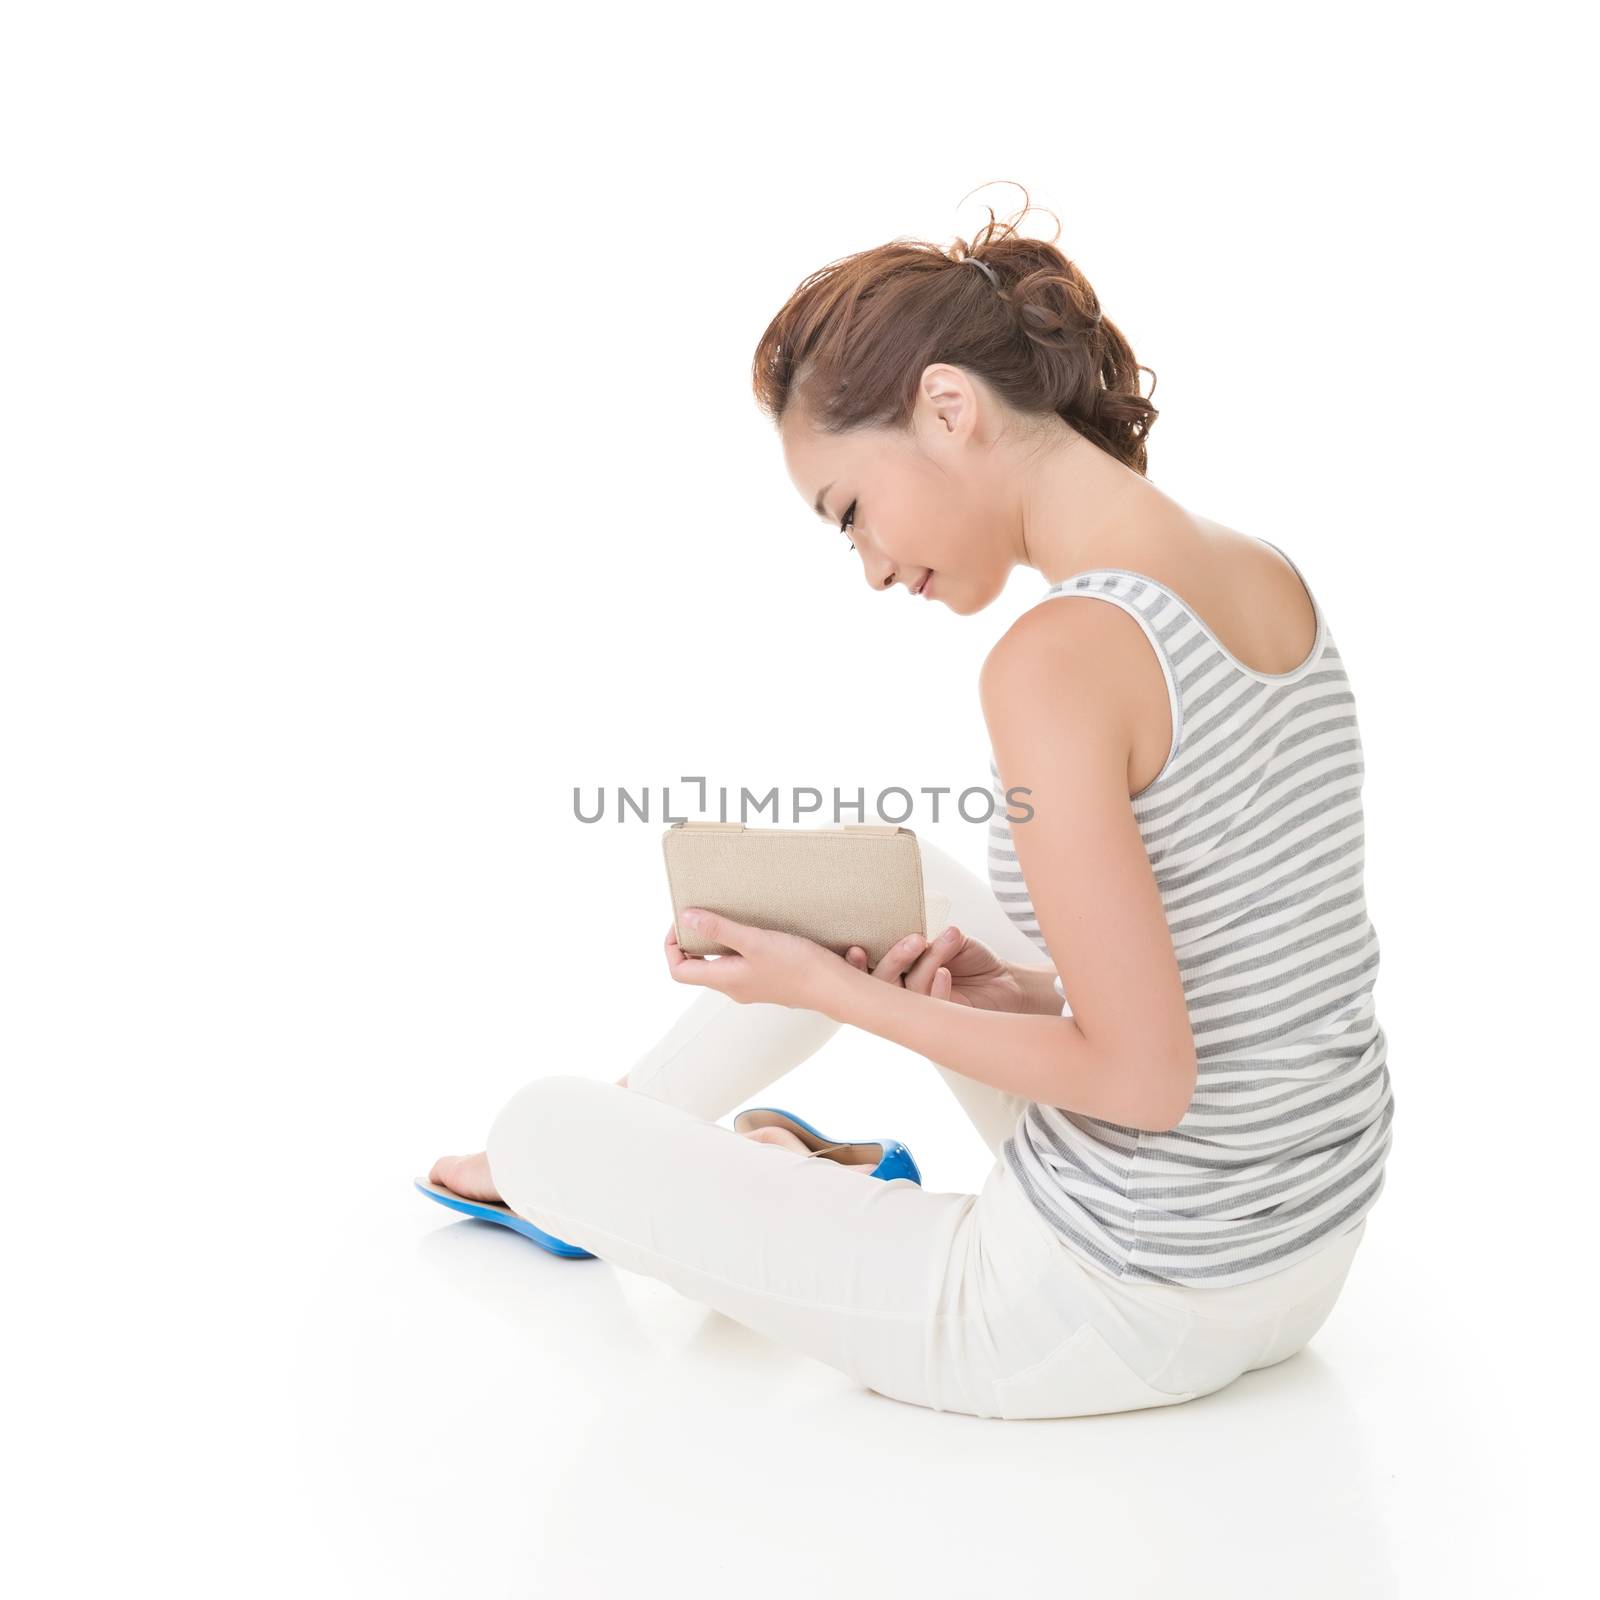 Young woman sit on ground and read a book, full length portrait isolated on white background.